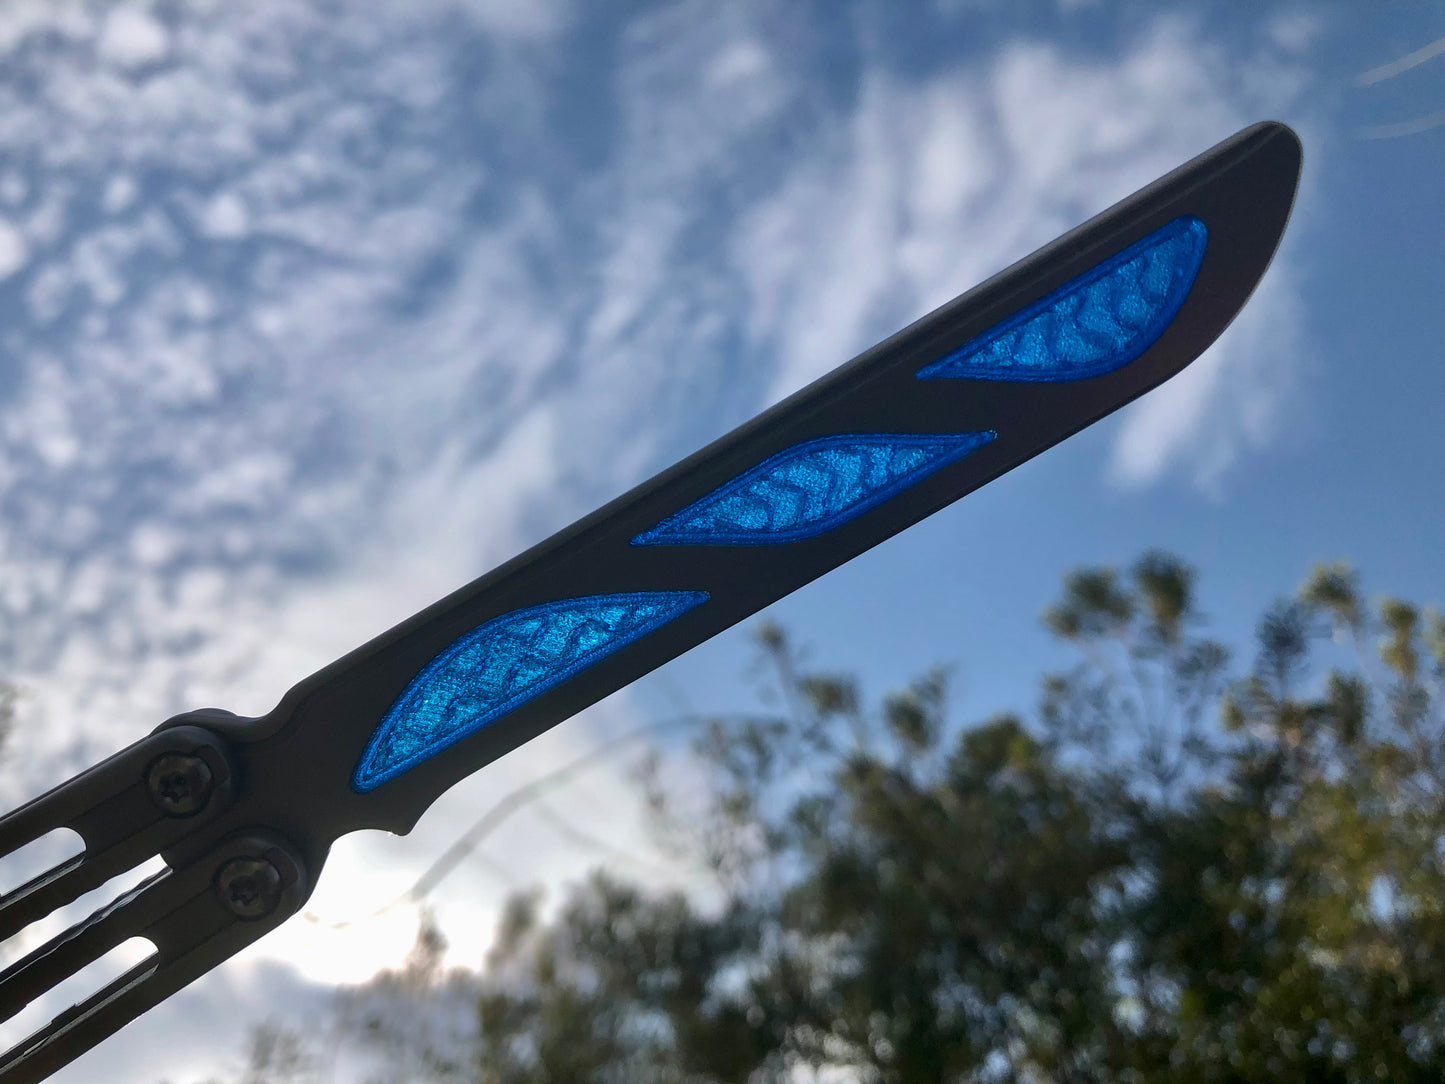 Silence the ring and adjust the weight distribution of your Nabalis Canyon balisong these custom-made Zippy inlays